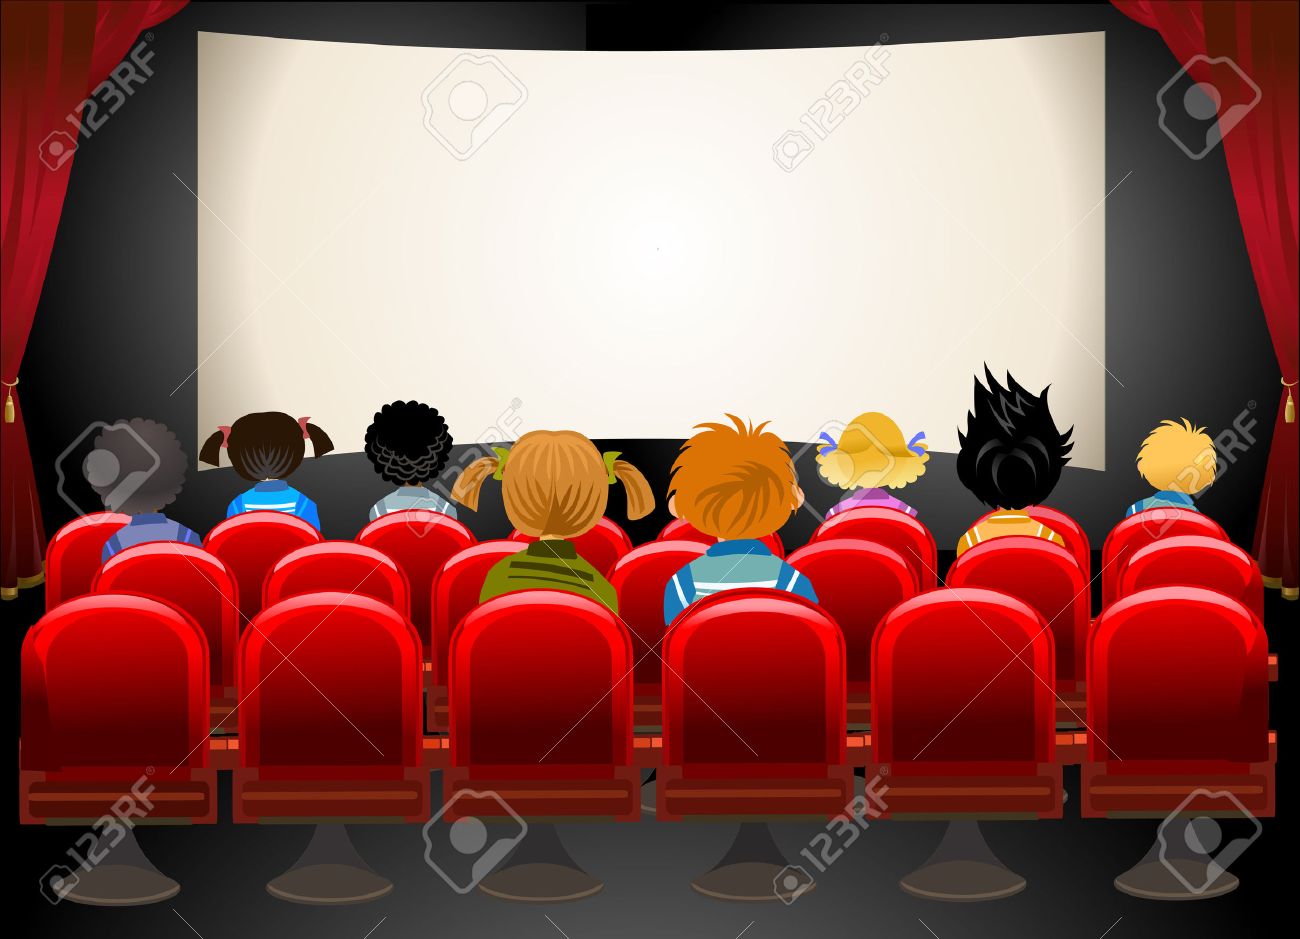 Audience clipart theatre audience, Audience theatre audience